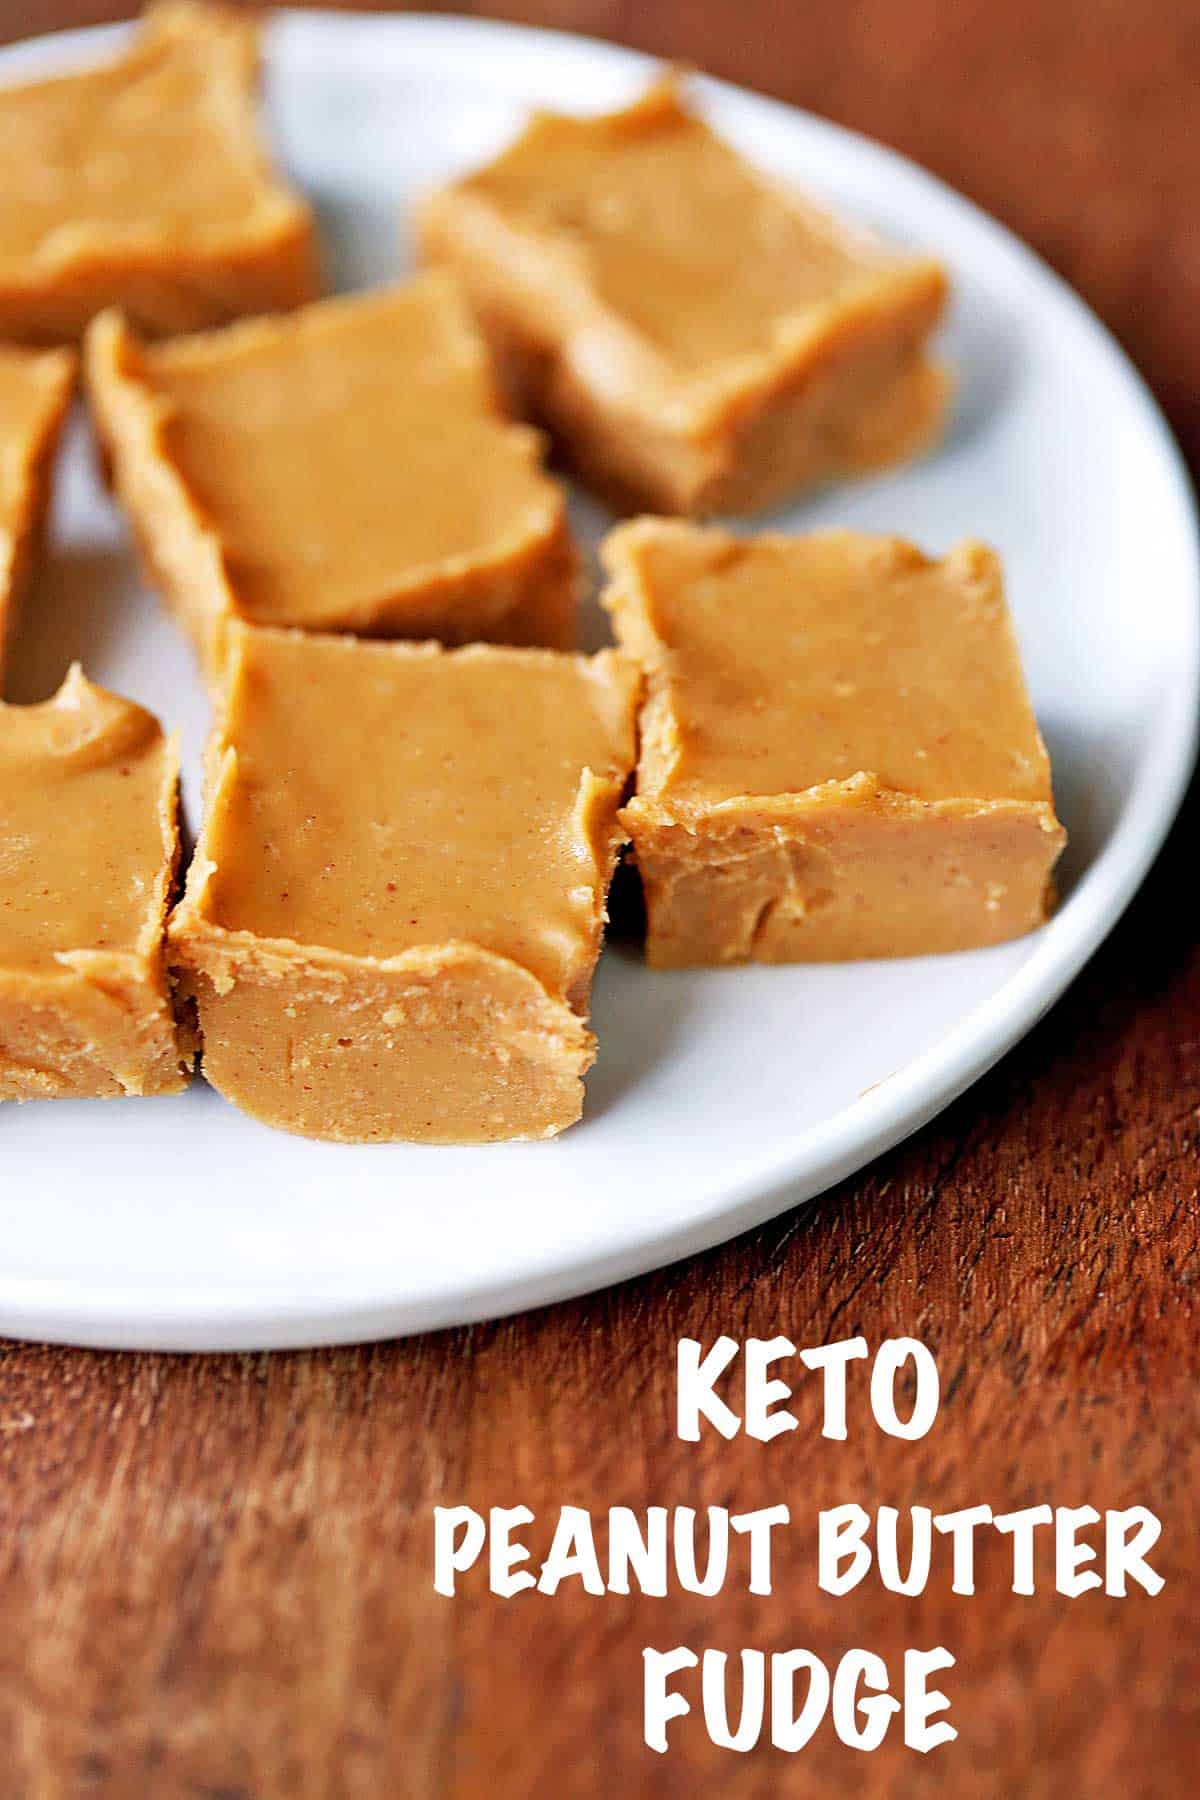 Keto peanut butter fudge squares served on a white plate.